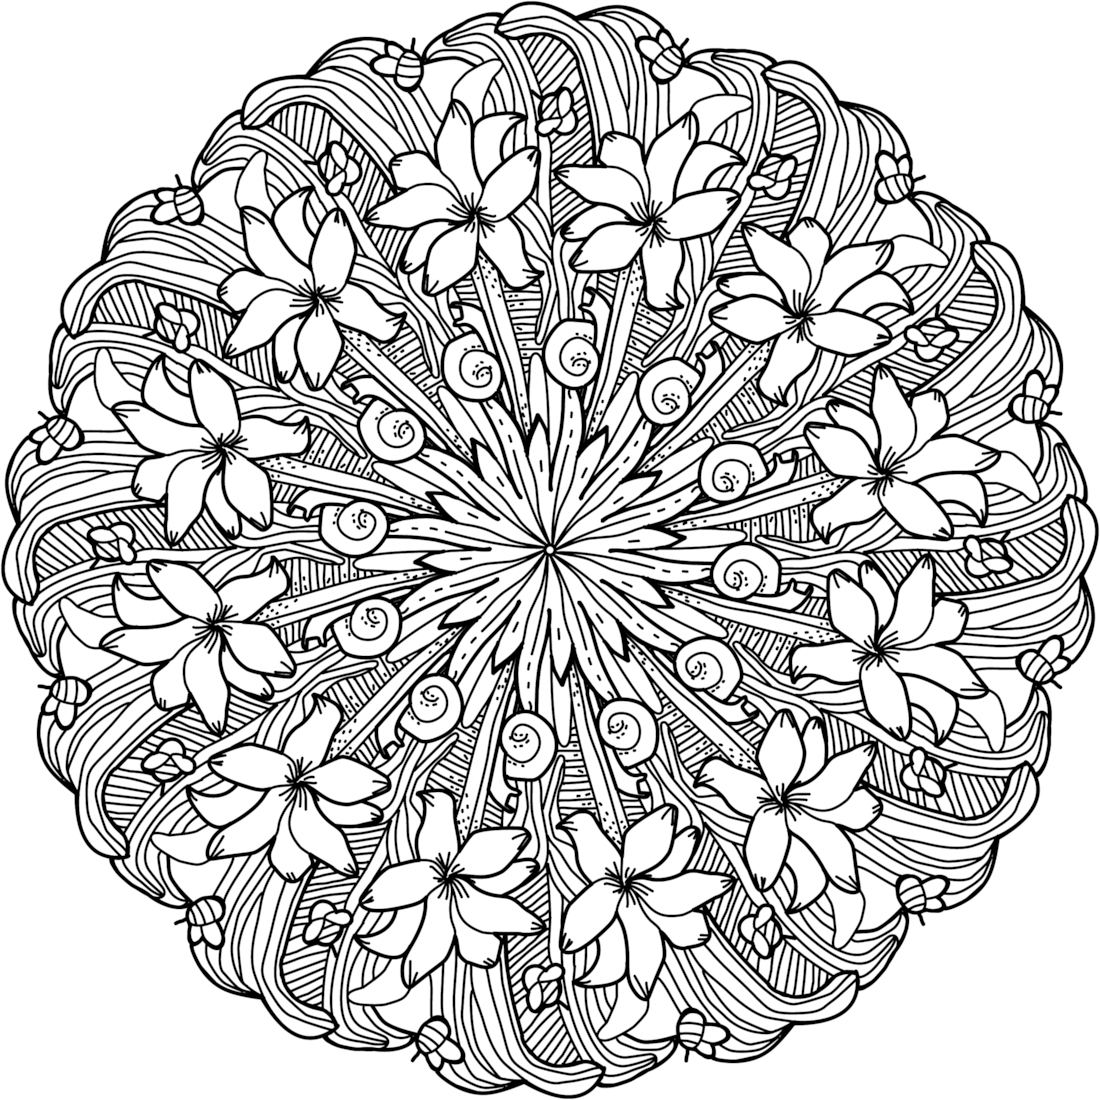 Free Printable Coloring Pages For Adults Advanced - Coloring Pages - Free Printable Coloring Pages For Adults Advanced